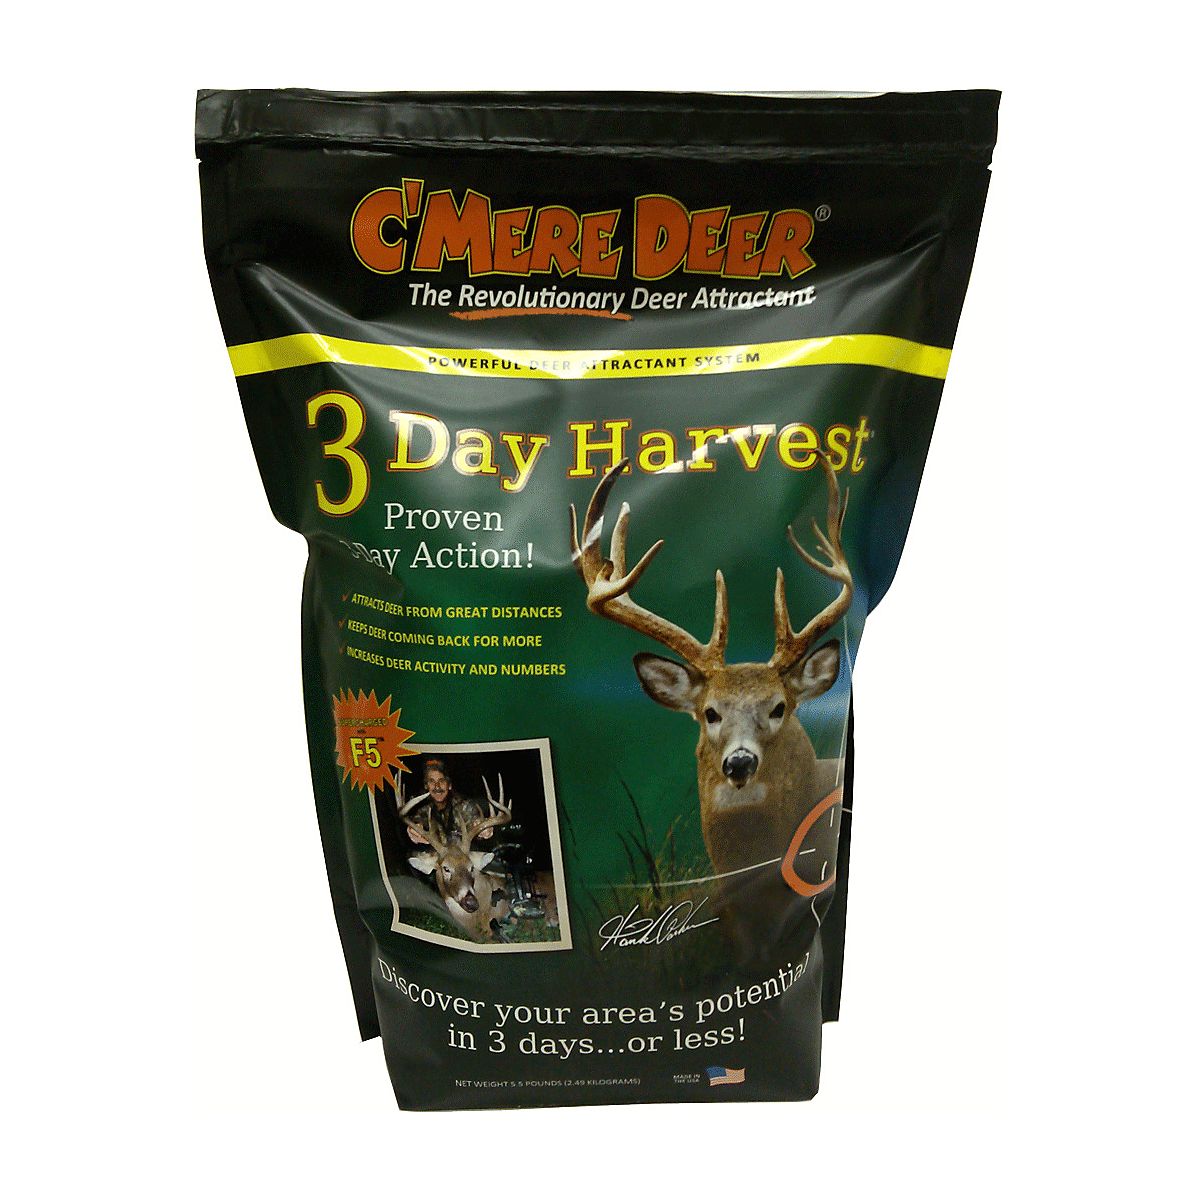 how to use c'mere deer 3 day harvest